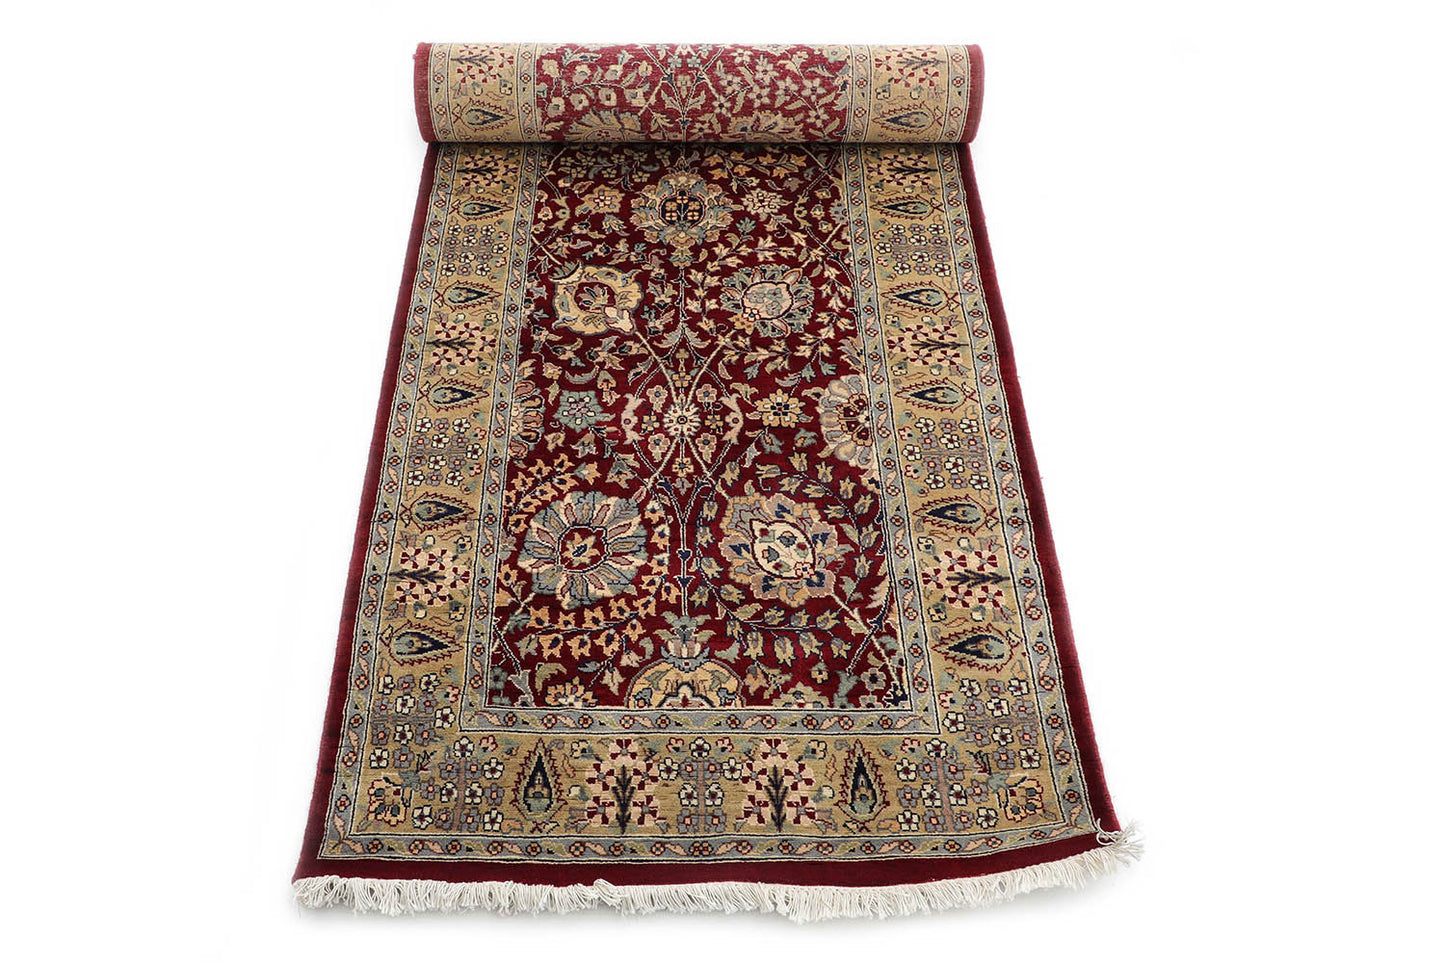 Hand-Knotted Lahore Carpet 2'.6" X 9' Oriental, Red Fine Wool Runner Rug 2.5x10